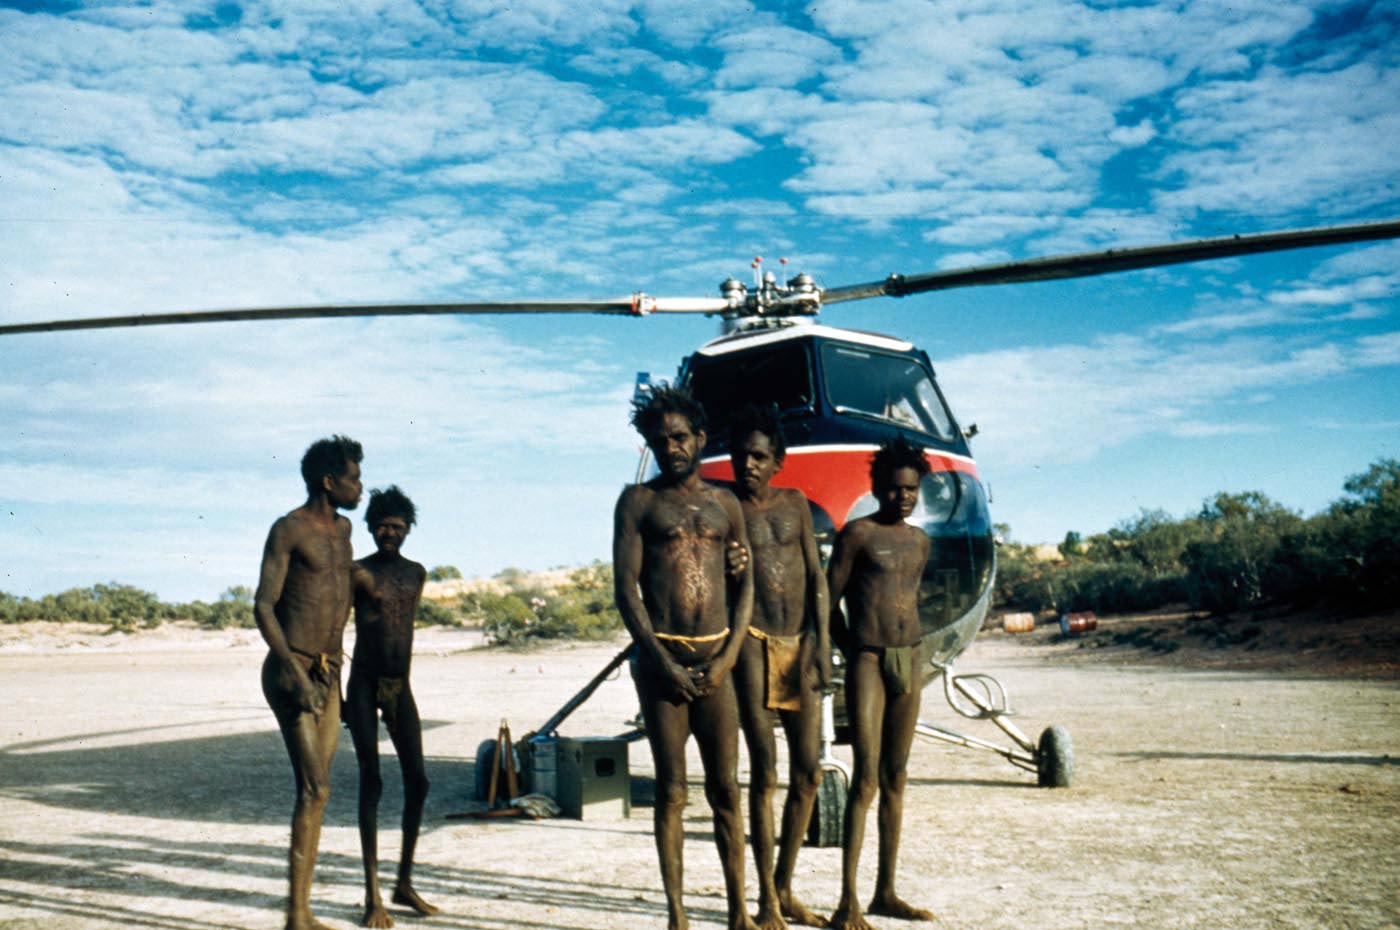 Men standing in front of a helicopter.